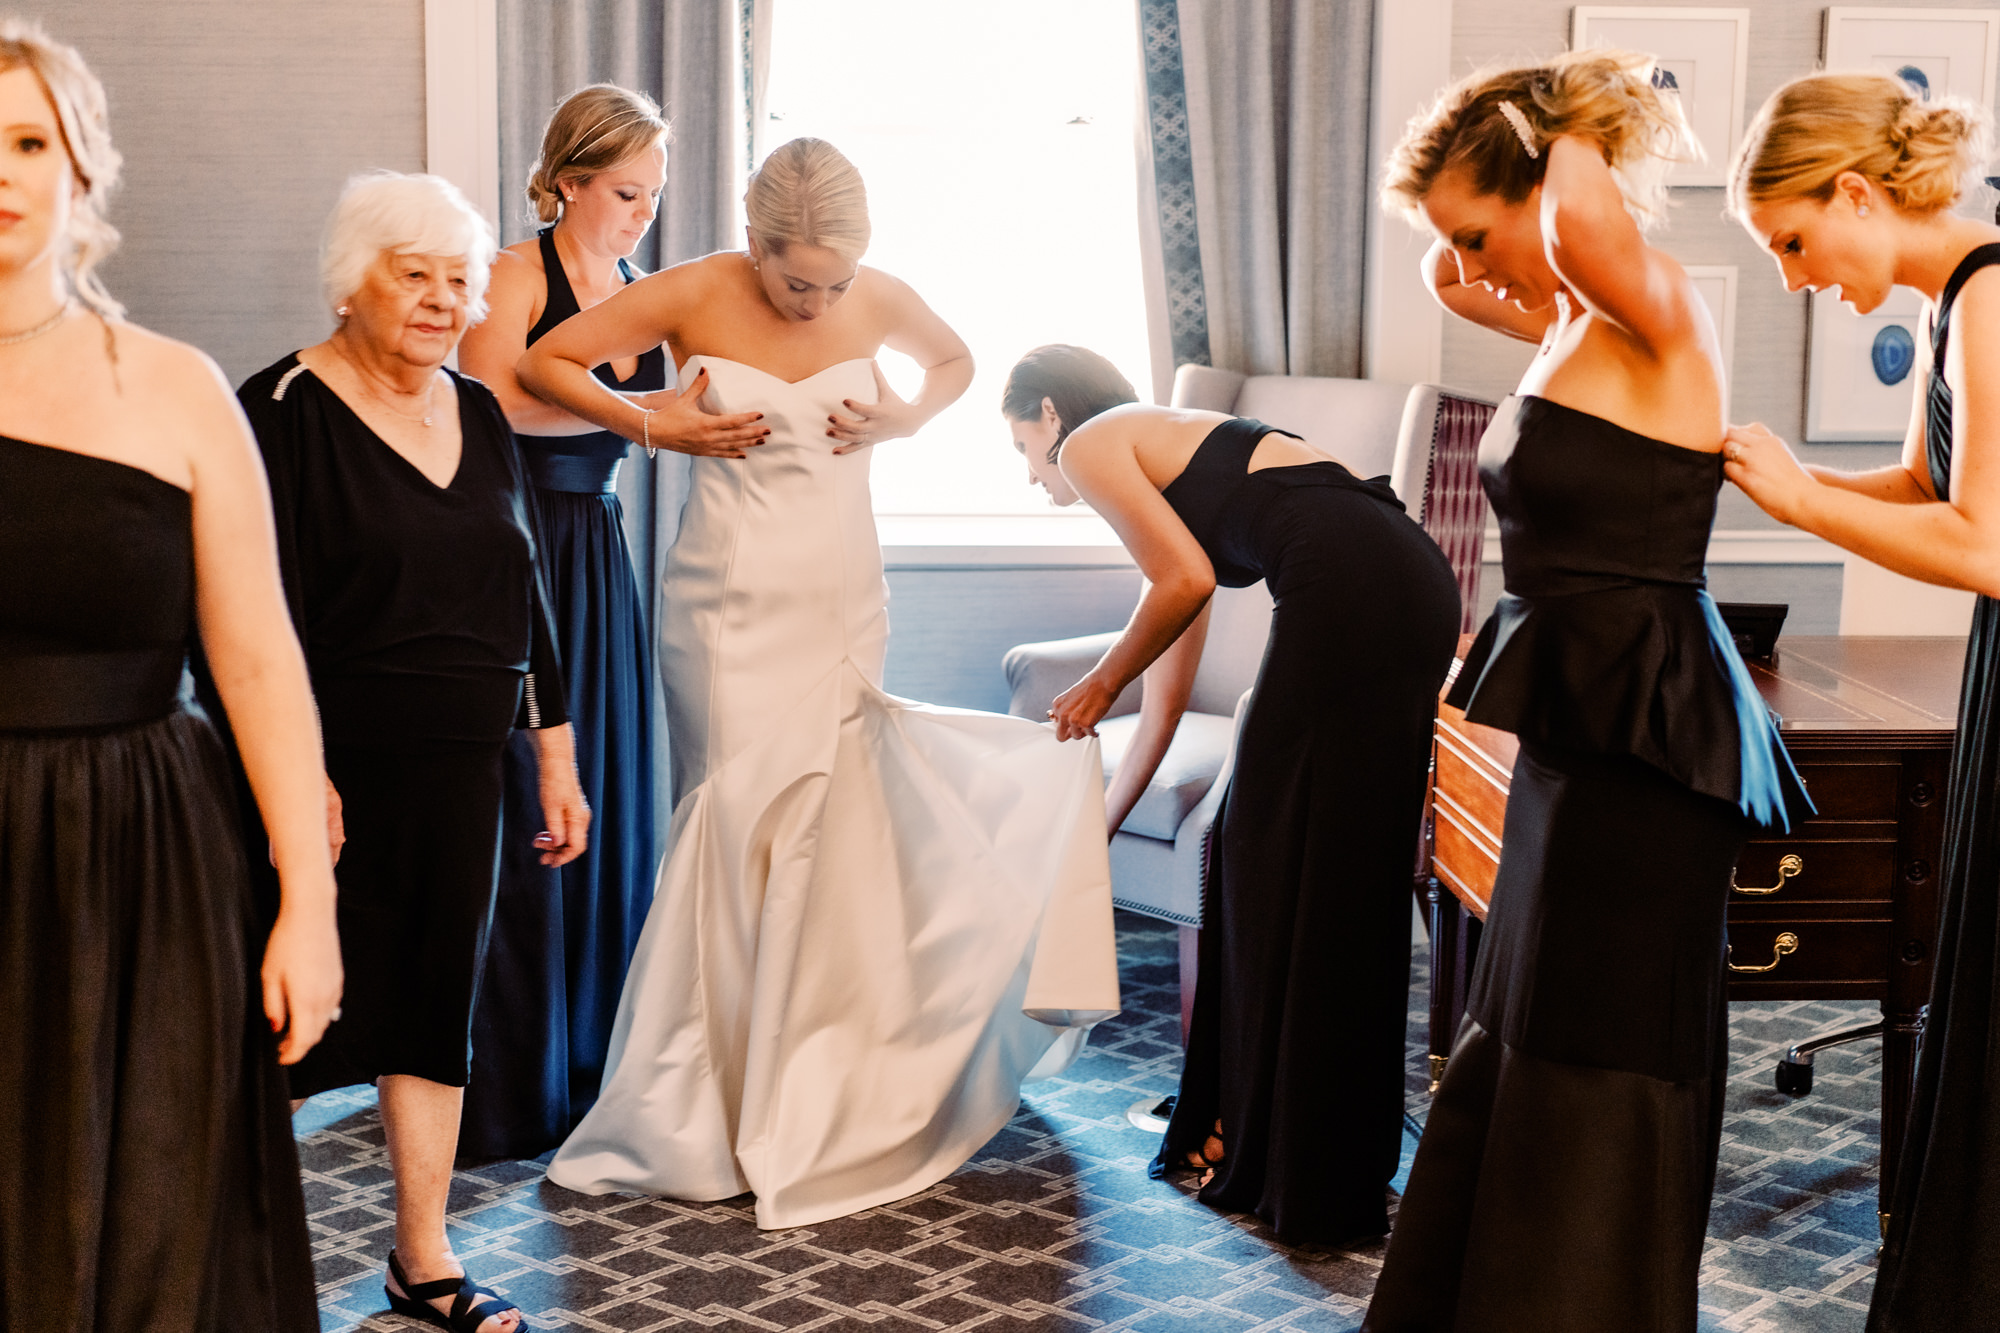 Bride Mary getting dressed with the help of her bridesmaids in classy black